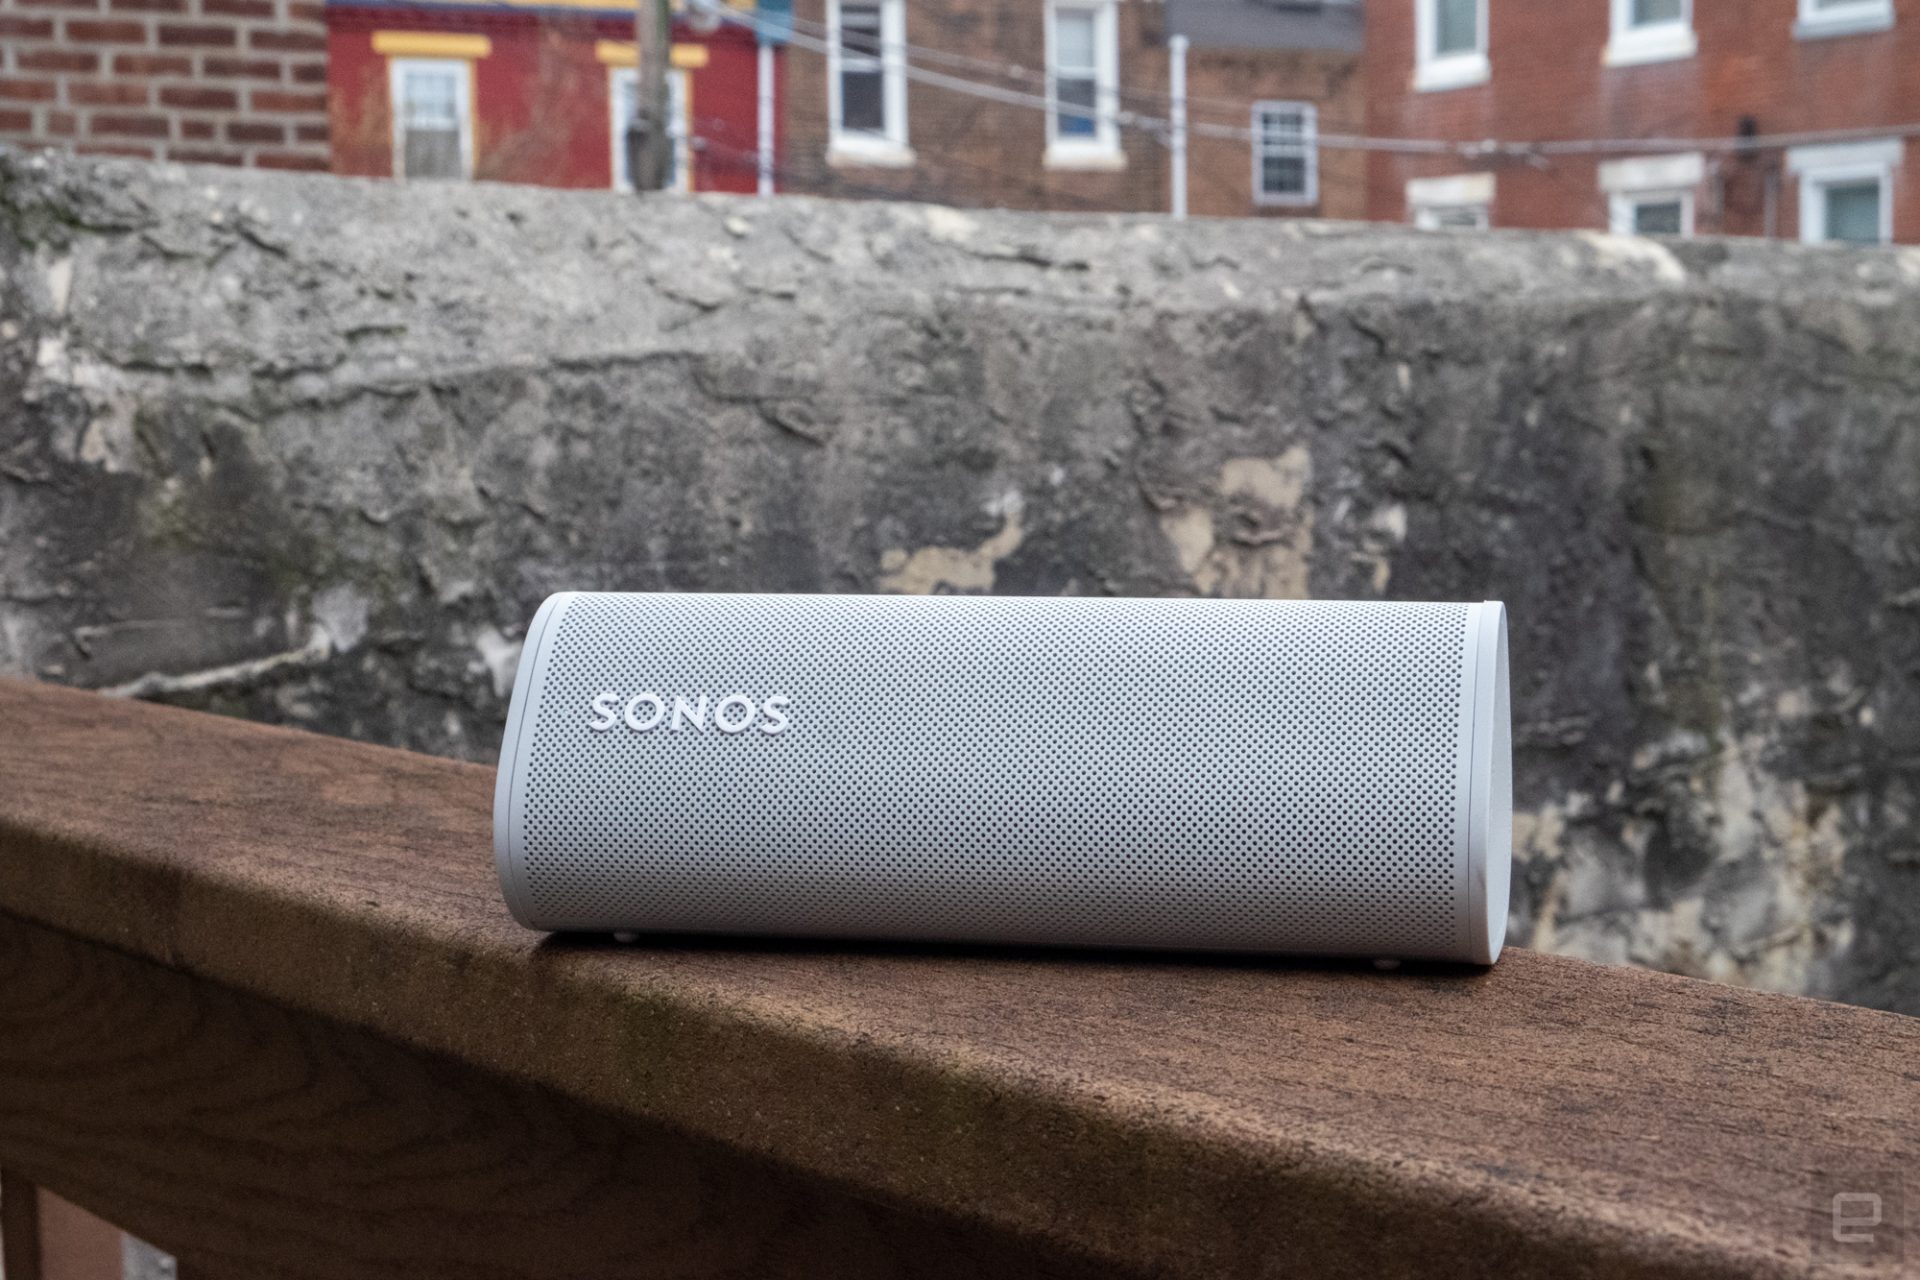 ICYMI: We take a look at out the novel Sonos Toddle transportable speaker